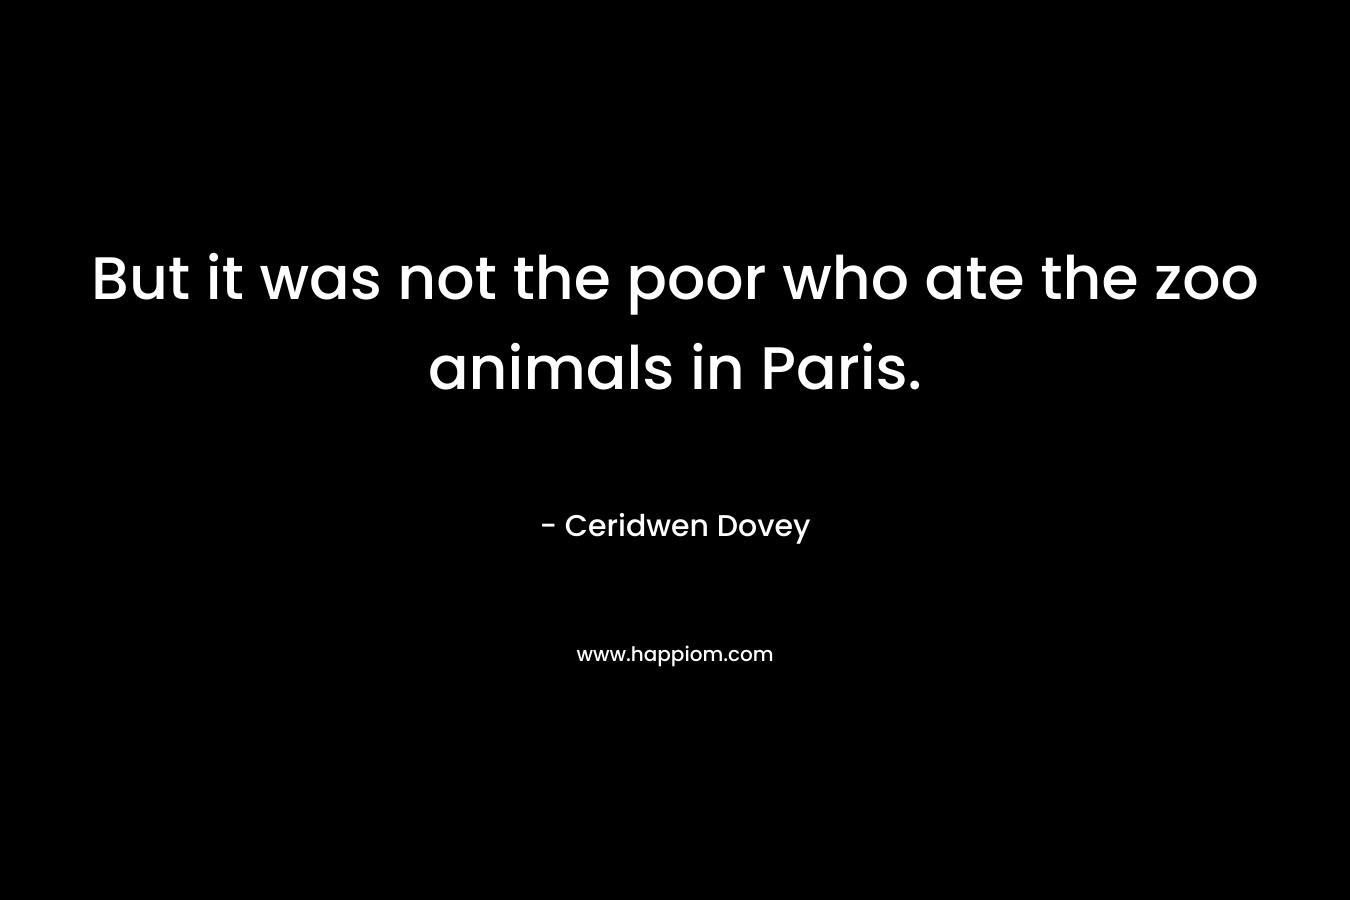 But it was not the poor who ate the zoo animals in Paris. – Ceridwen Dovey